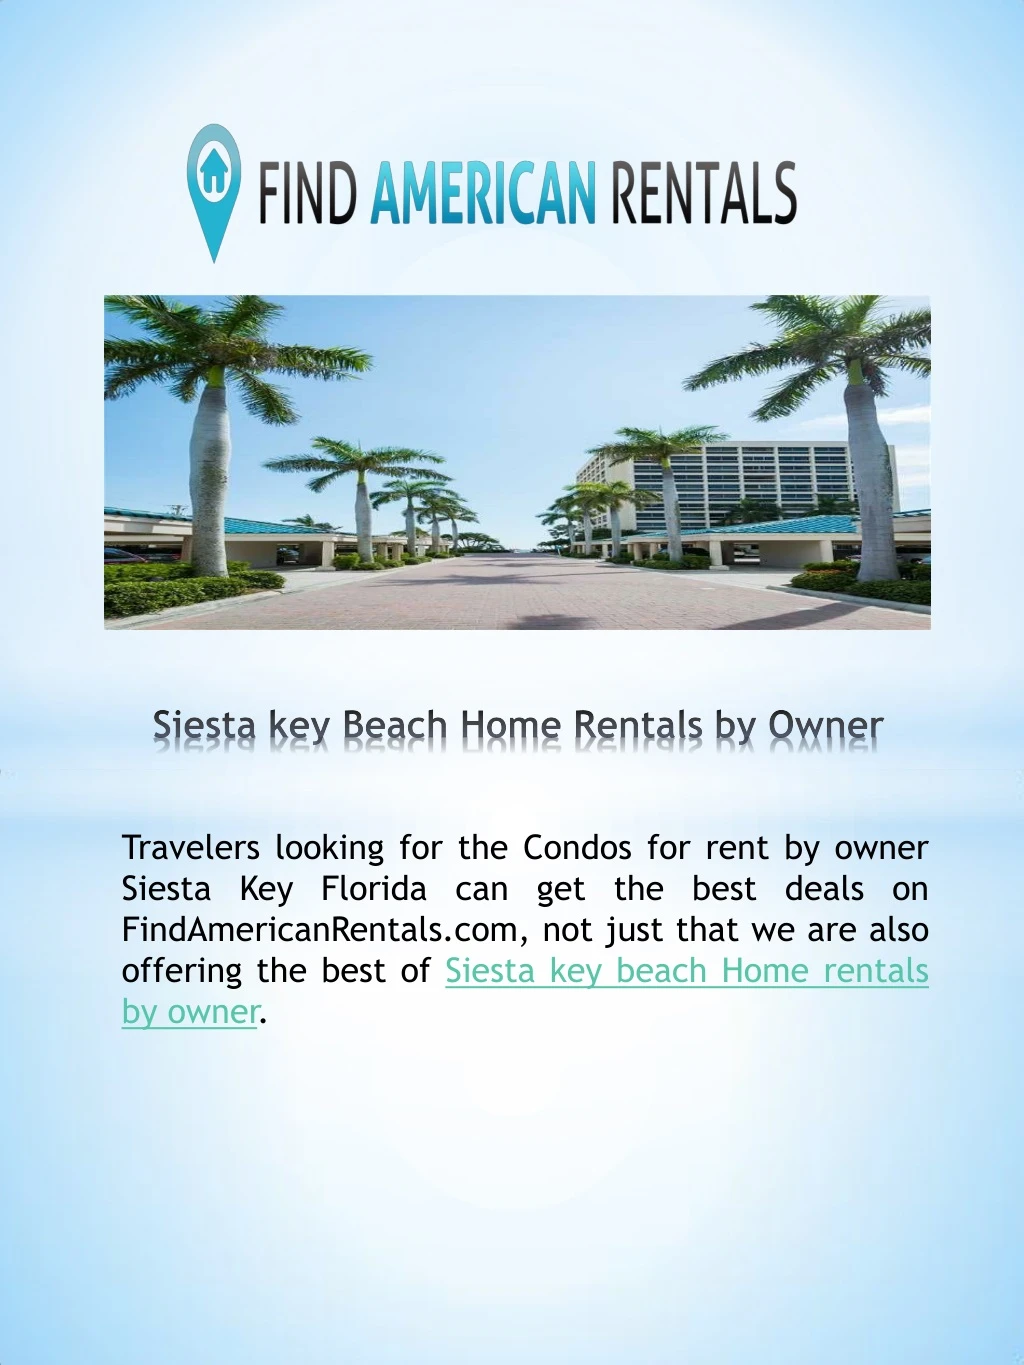 travelers looking for the condos for rent